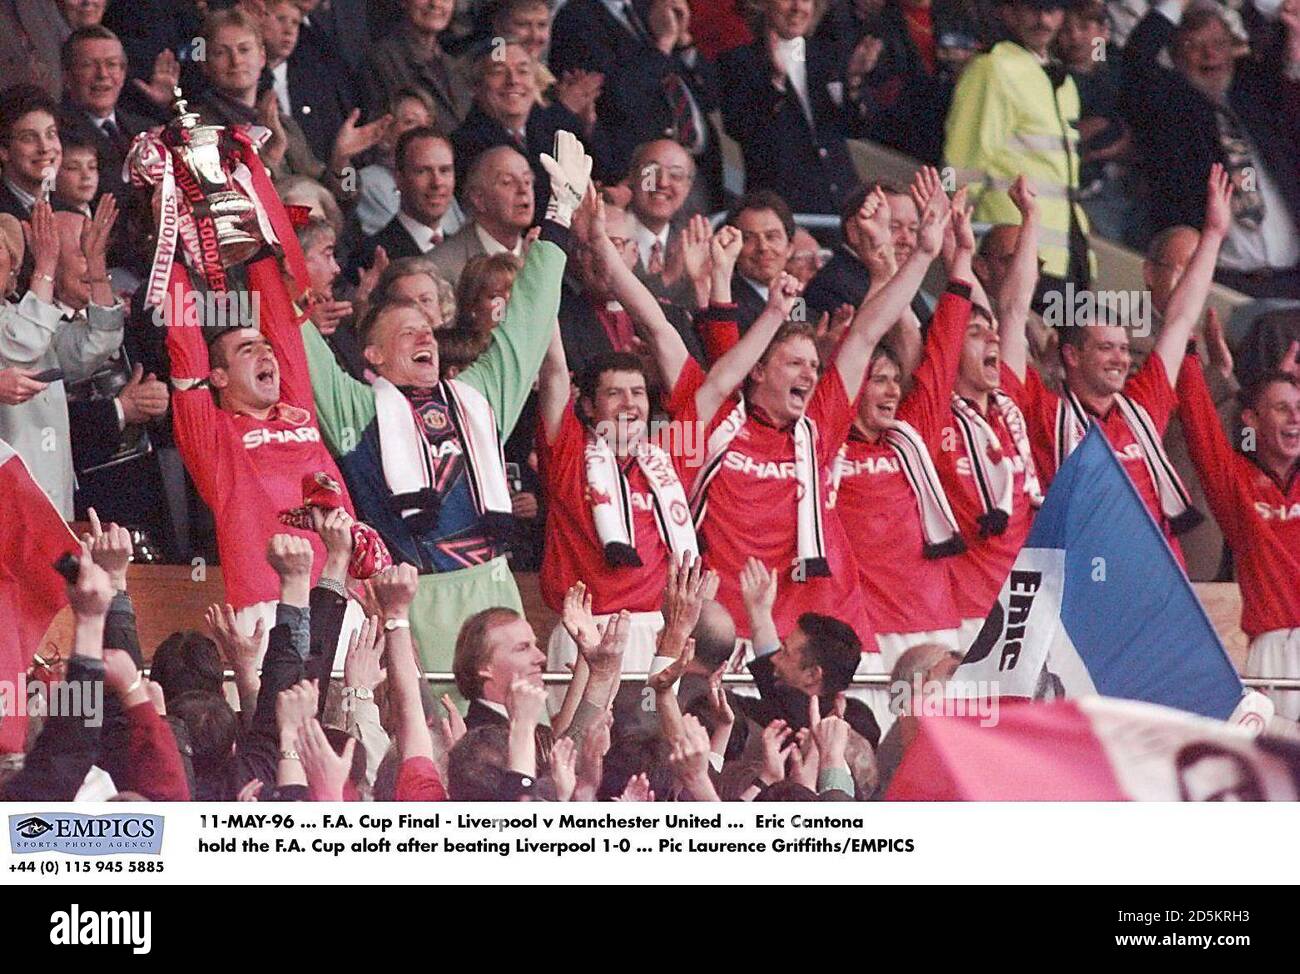 Eric Cantona hold the FA Cup aloft after his goal beat Liverpool 1-0, as his teammates celebrate; (l-r) Cantona, Peter Schmeichel, Denis Irwin, David May, David Beckham, Gary Neville, Gary Pallister, Nicky Butt. Stock Photo